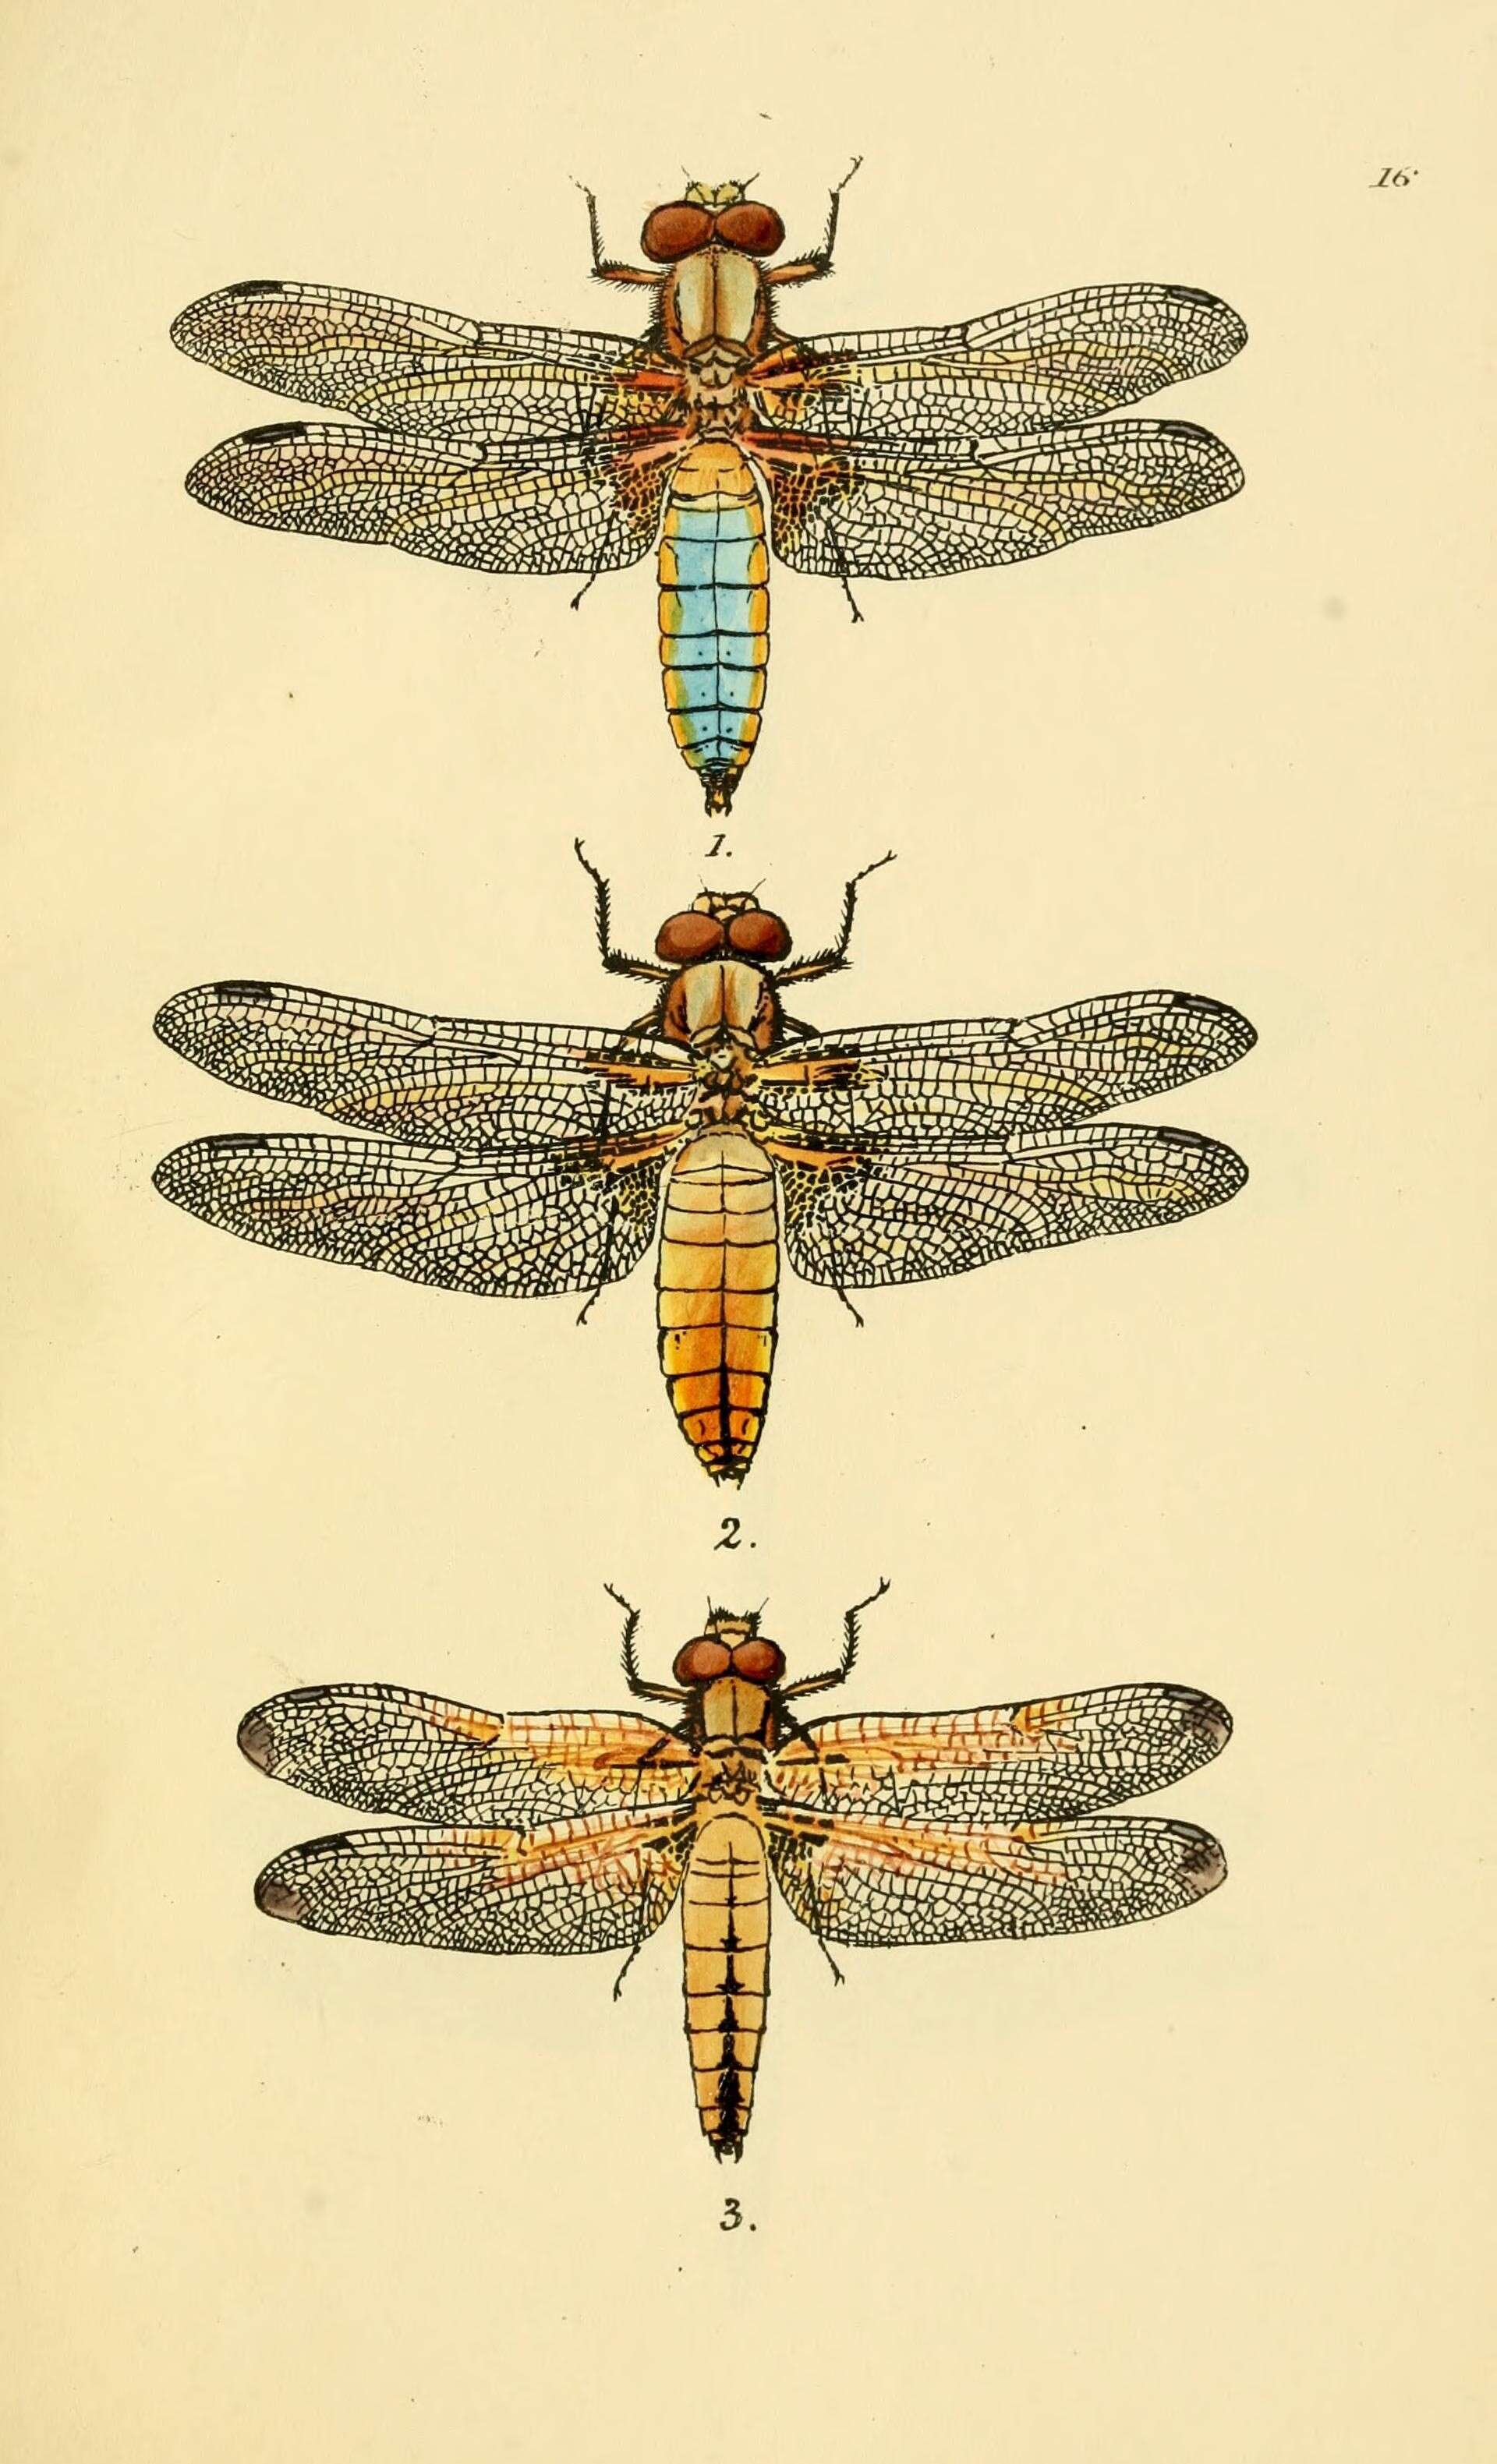 Image of Broad-bodied chaser